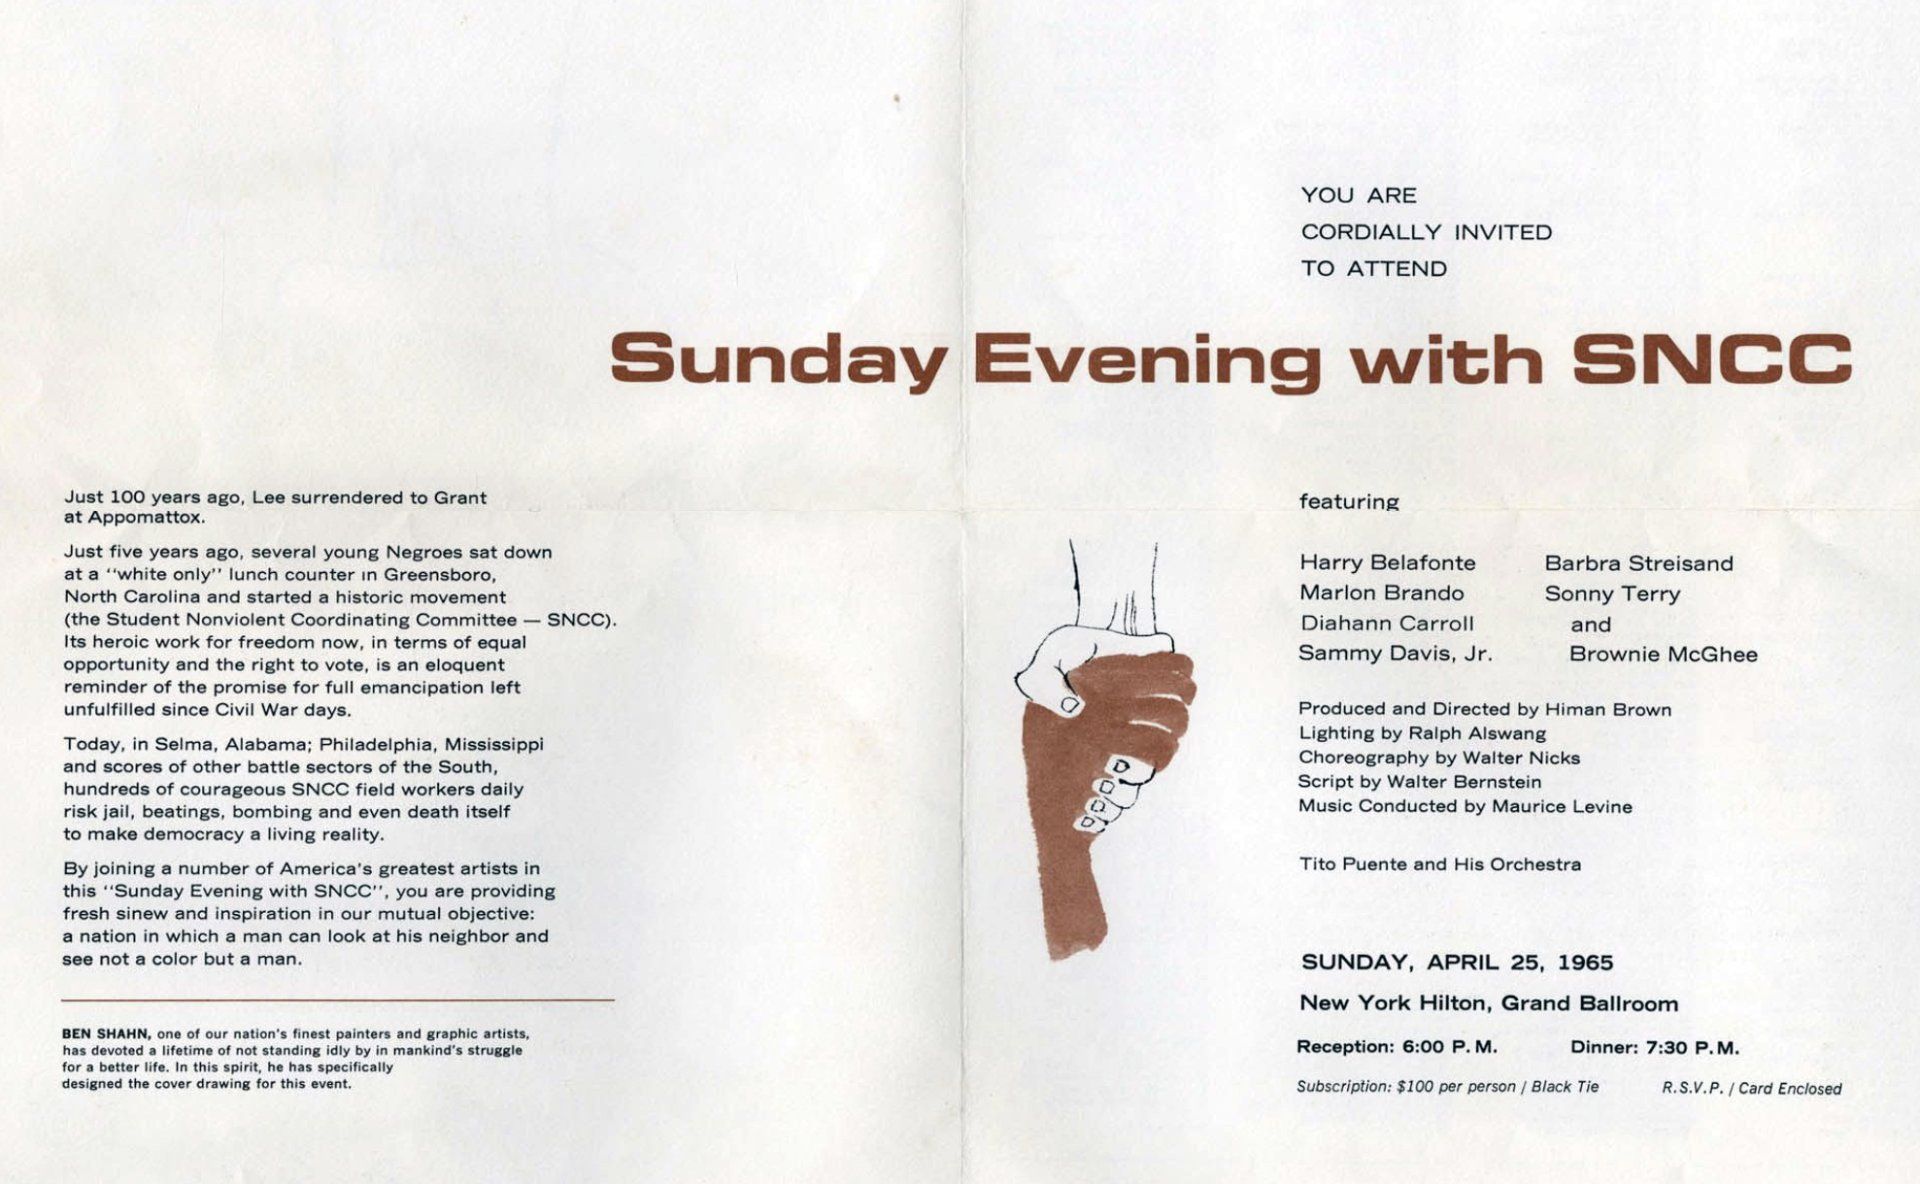 Inside pages of the SNCC program.